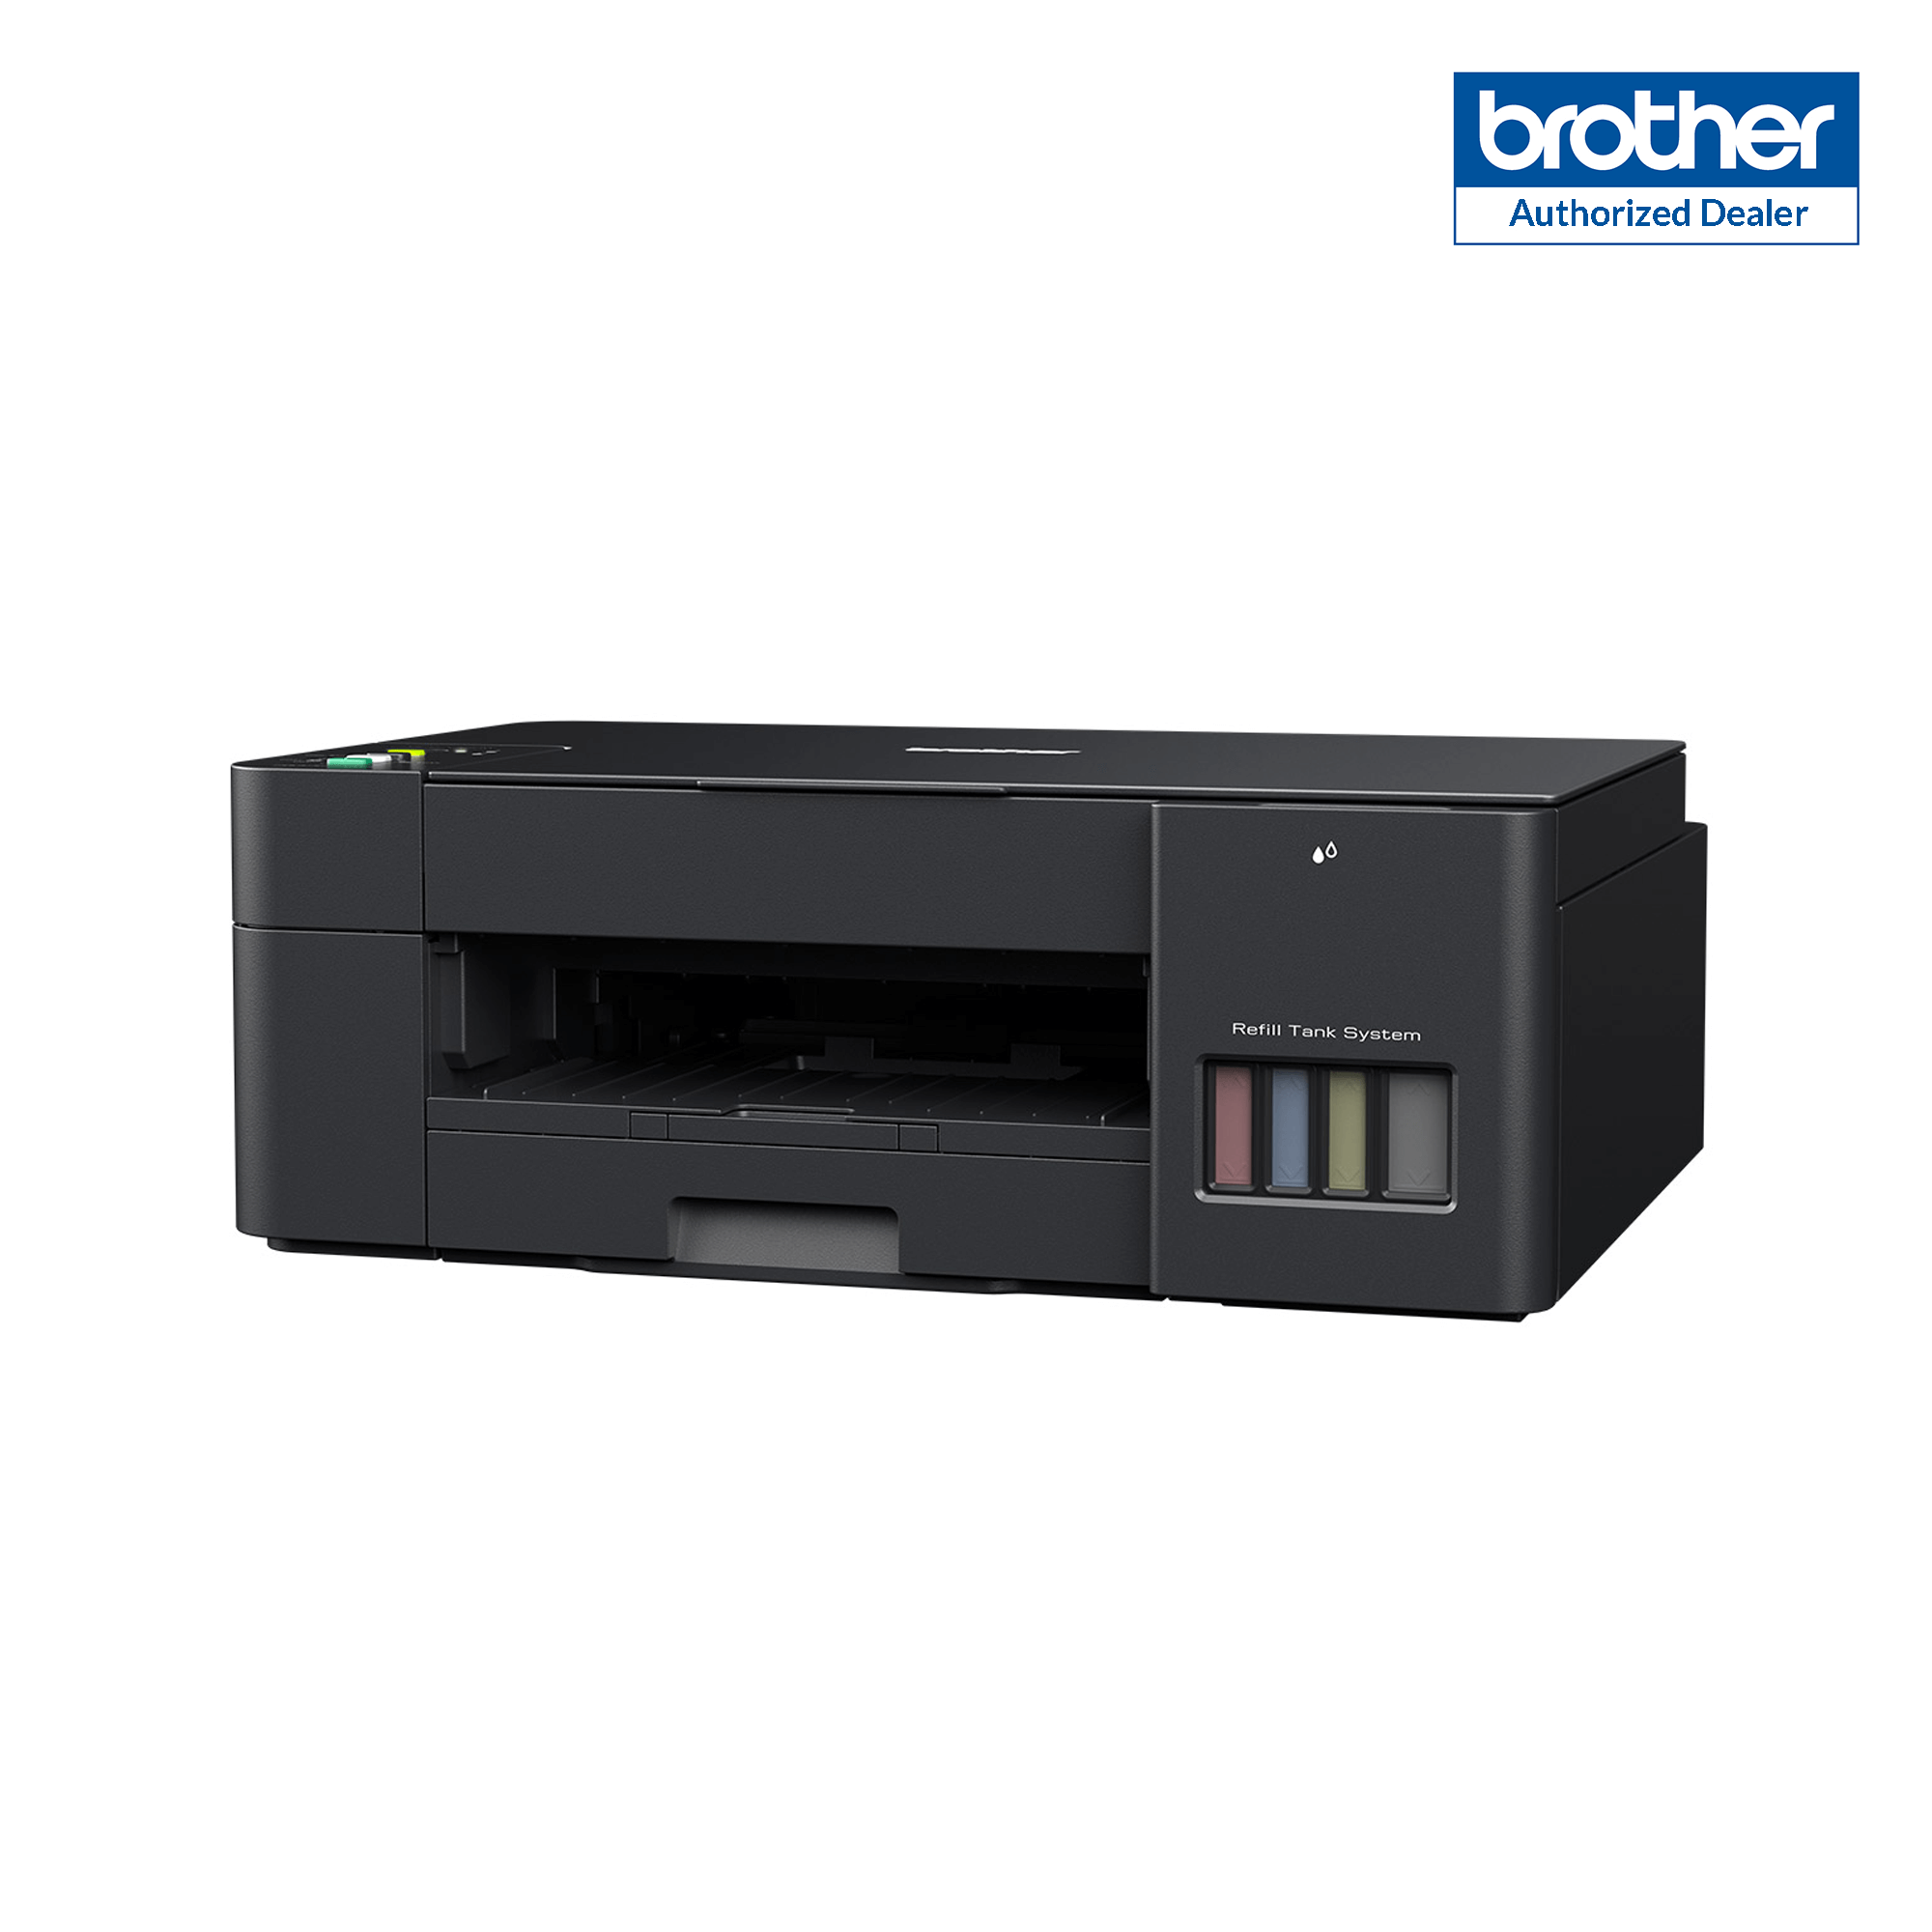 Brother DCP T420W Ink Tank Printer